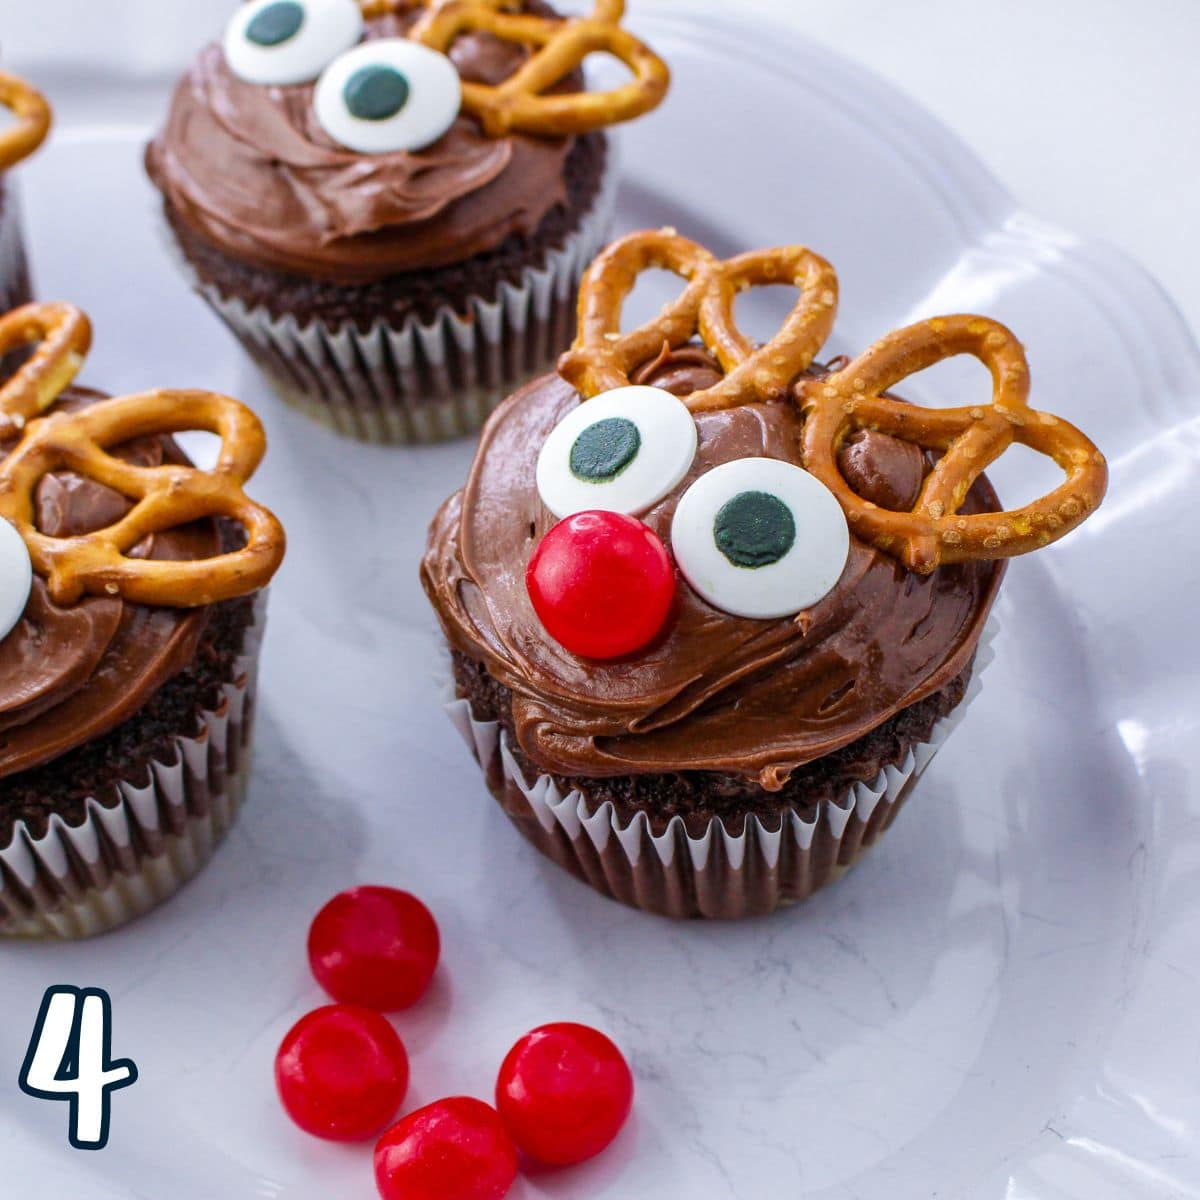 Reindeer cupcakes on a plate.